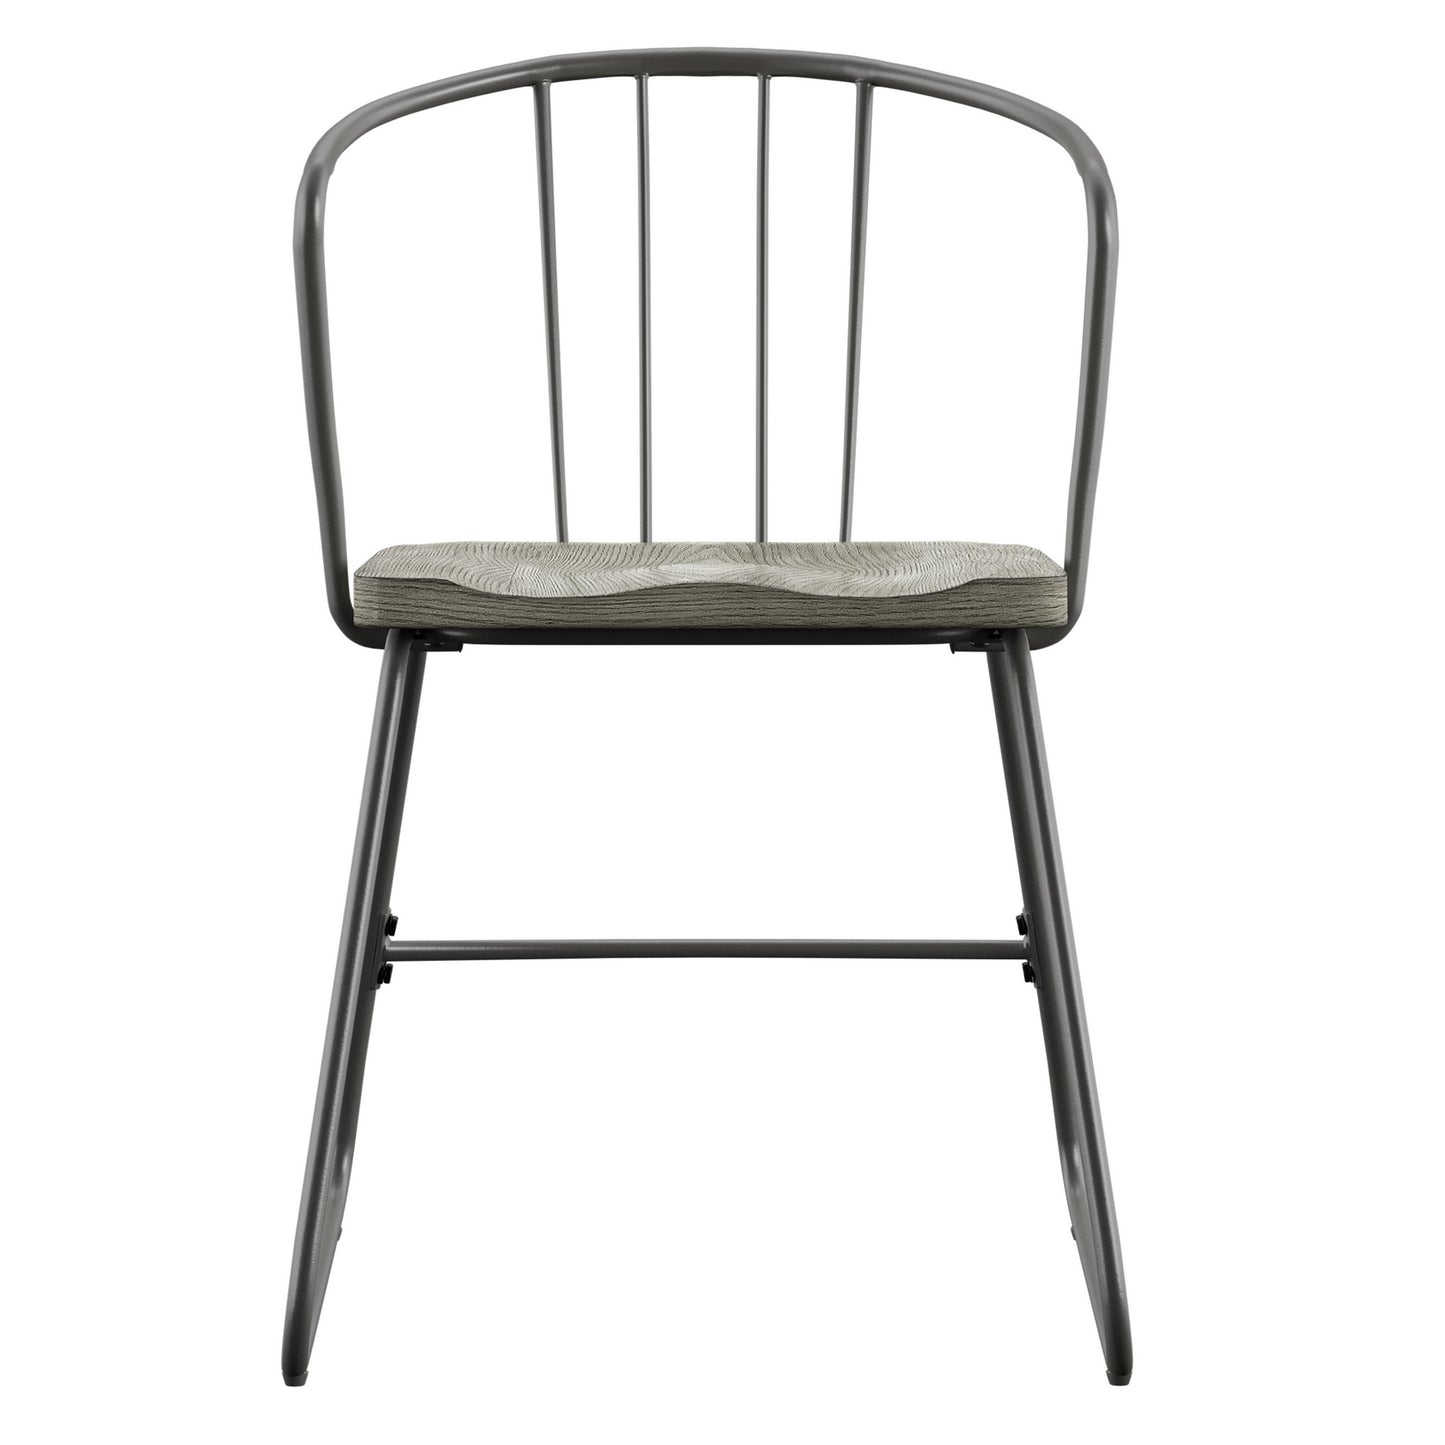 Iron and Grey Finish Dining Chairs (Set of 2)